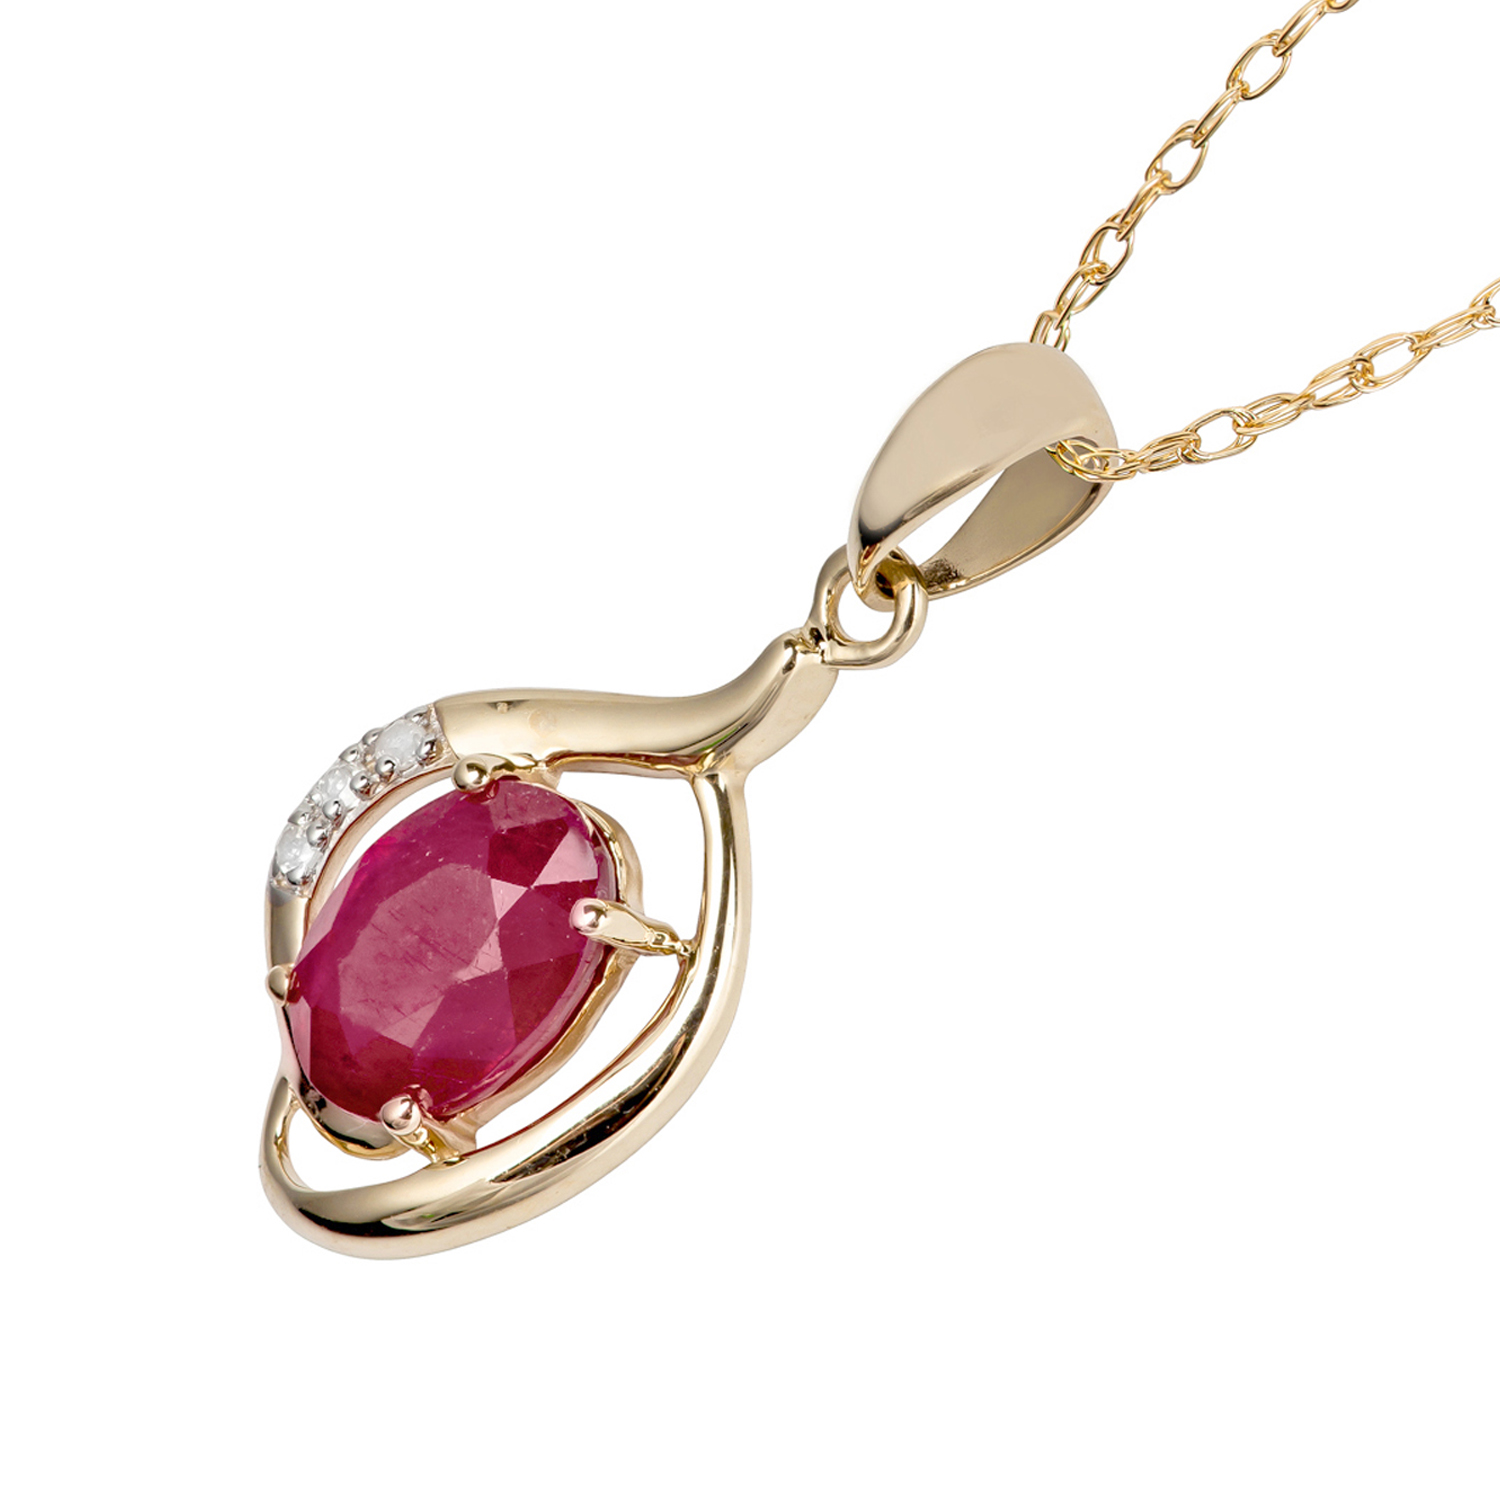 10k Yellow Gold Genuine Oval Ruby and Diamond Pendant Necklace | eBay